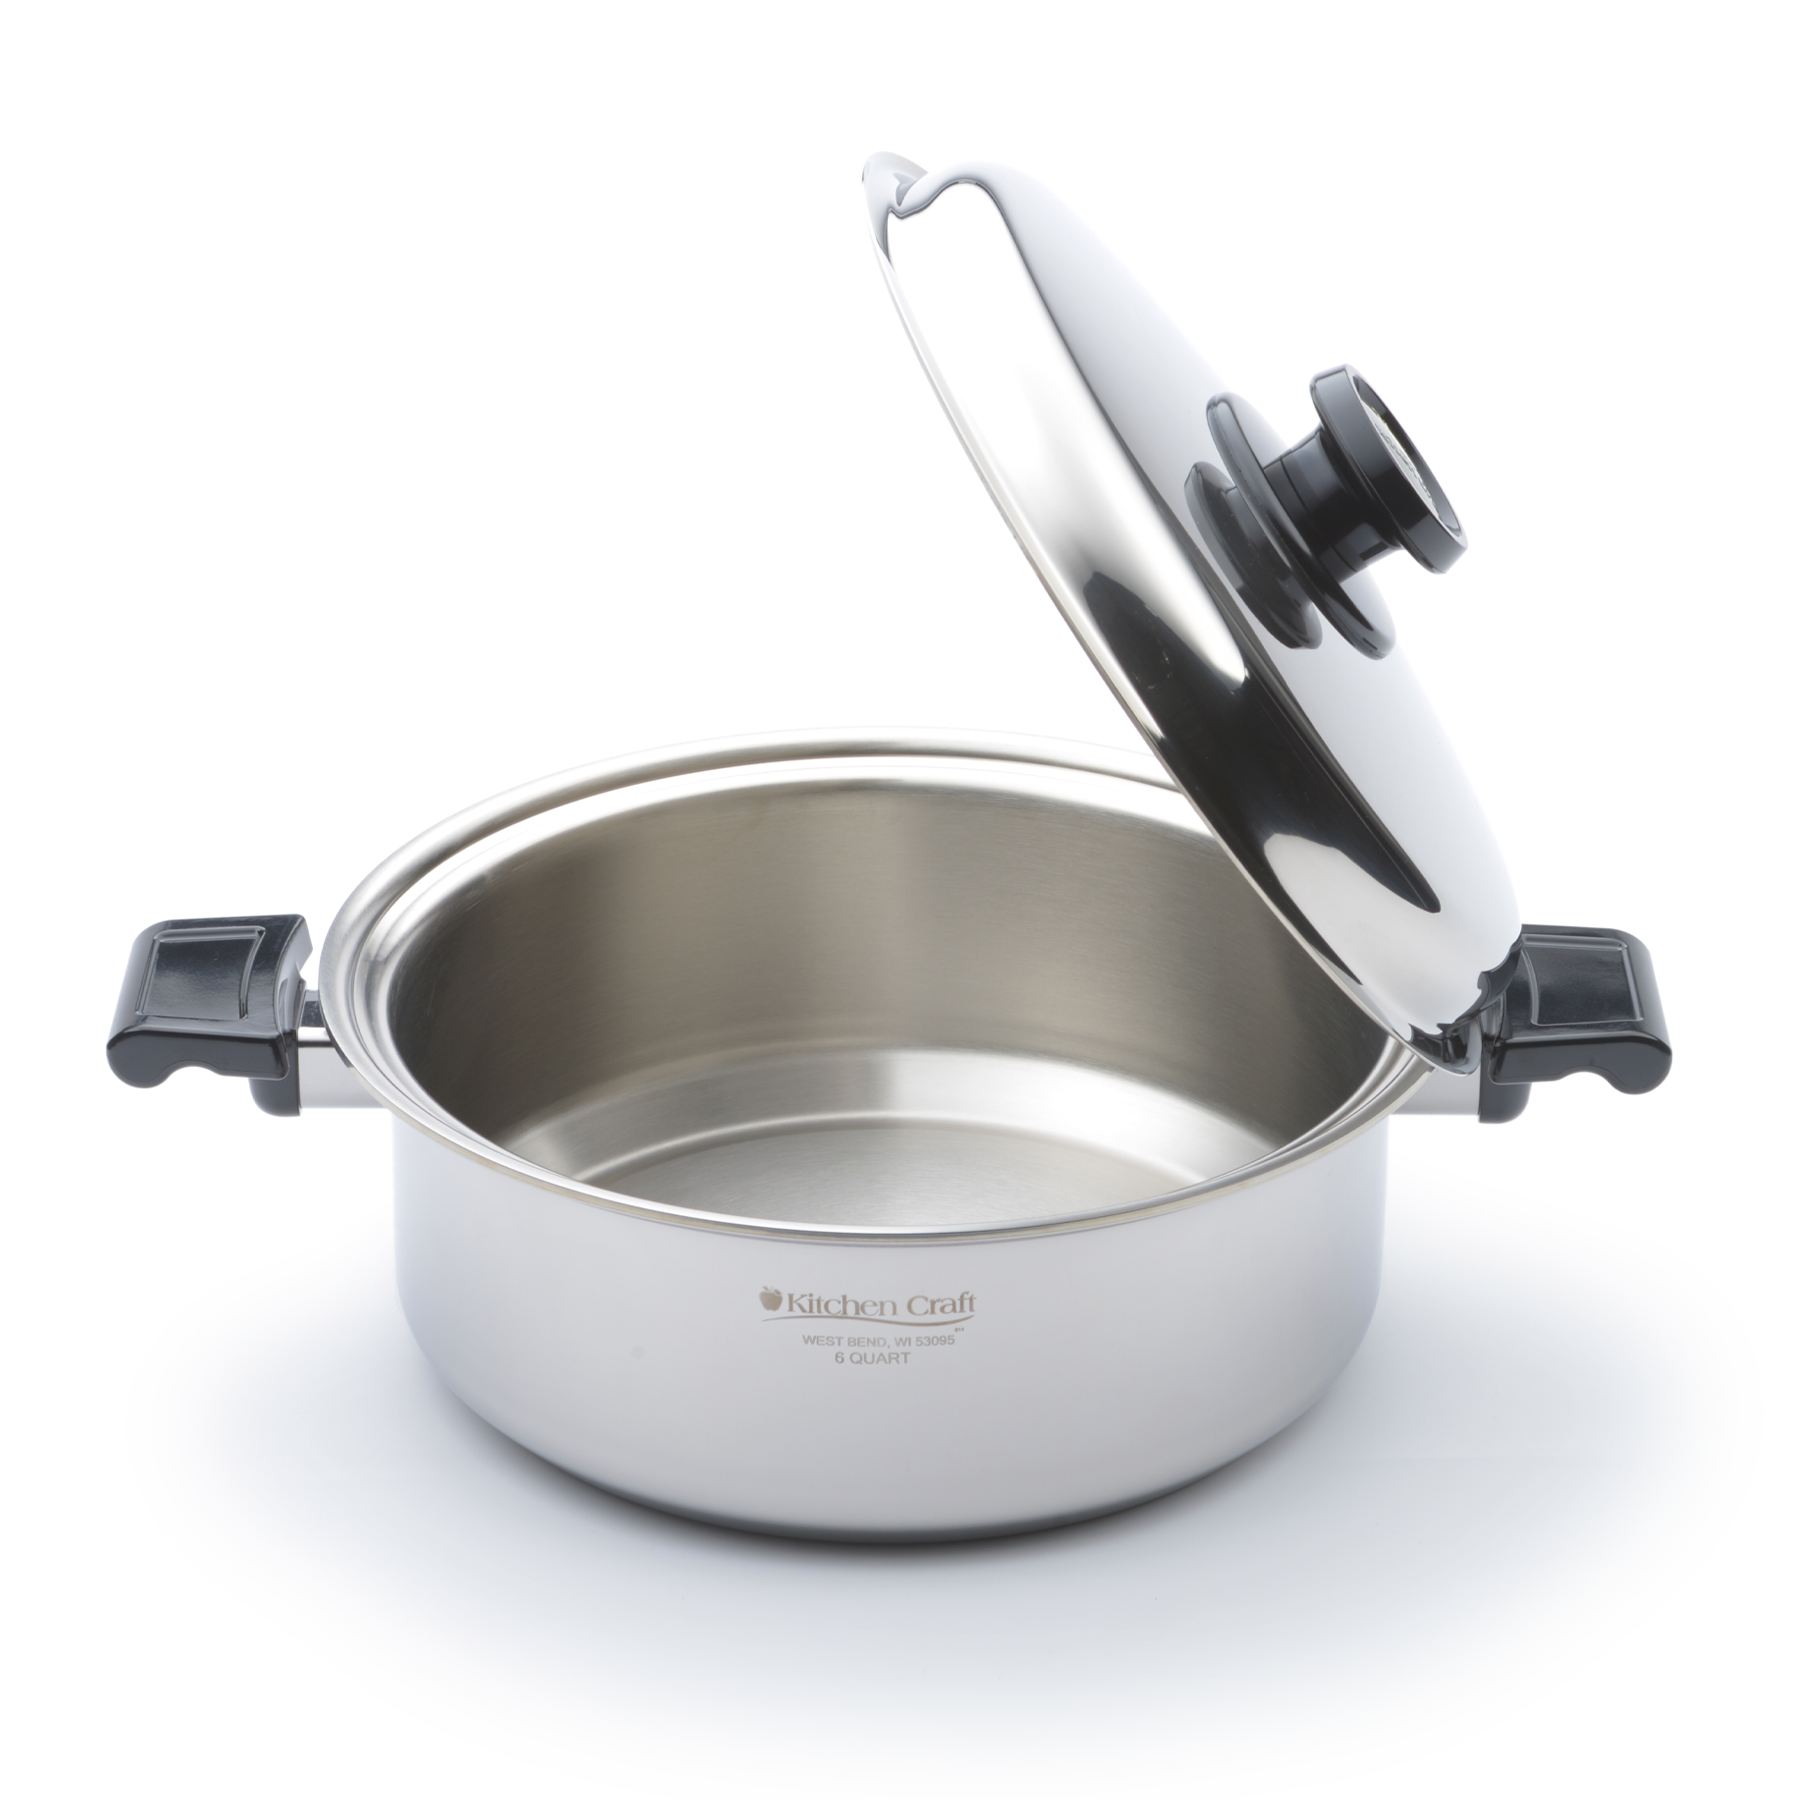 6 Quart Stock Pot with Lid and utensils - Cookware